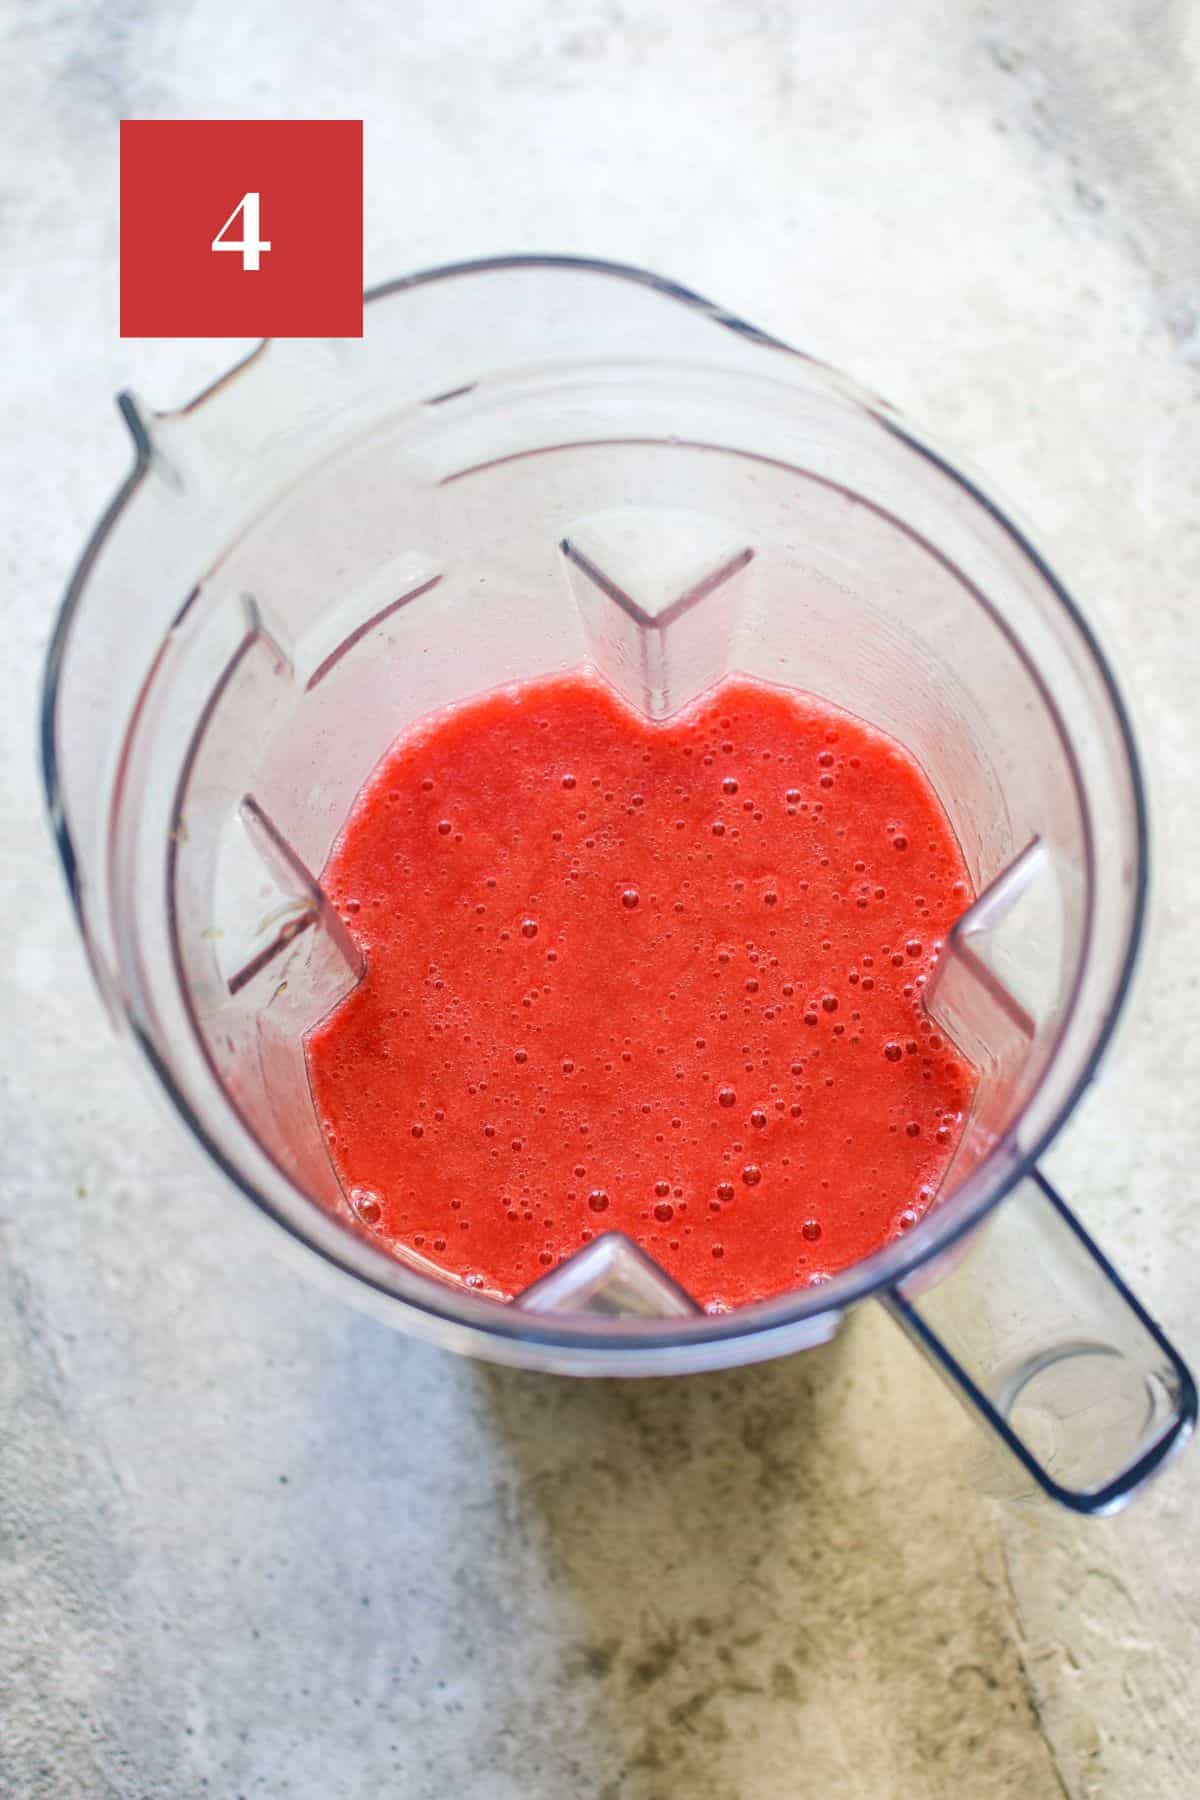 Strawberry Lemonade Sorbet Base in a blender body on a stone background. In the upper left corner is a dark red square with a white '4' in the center.